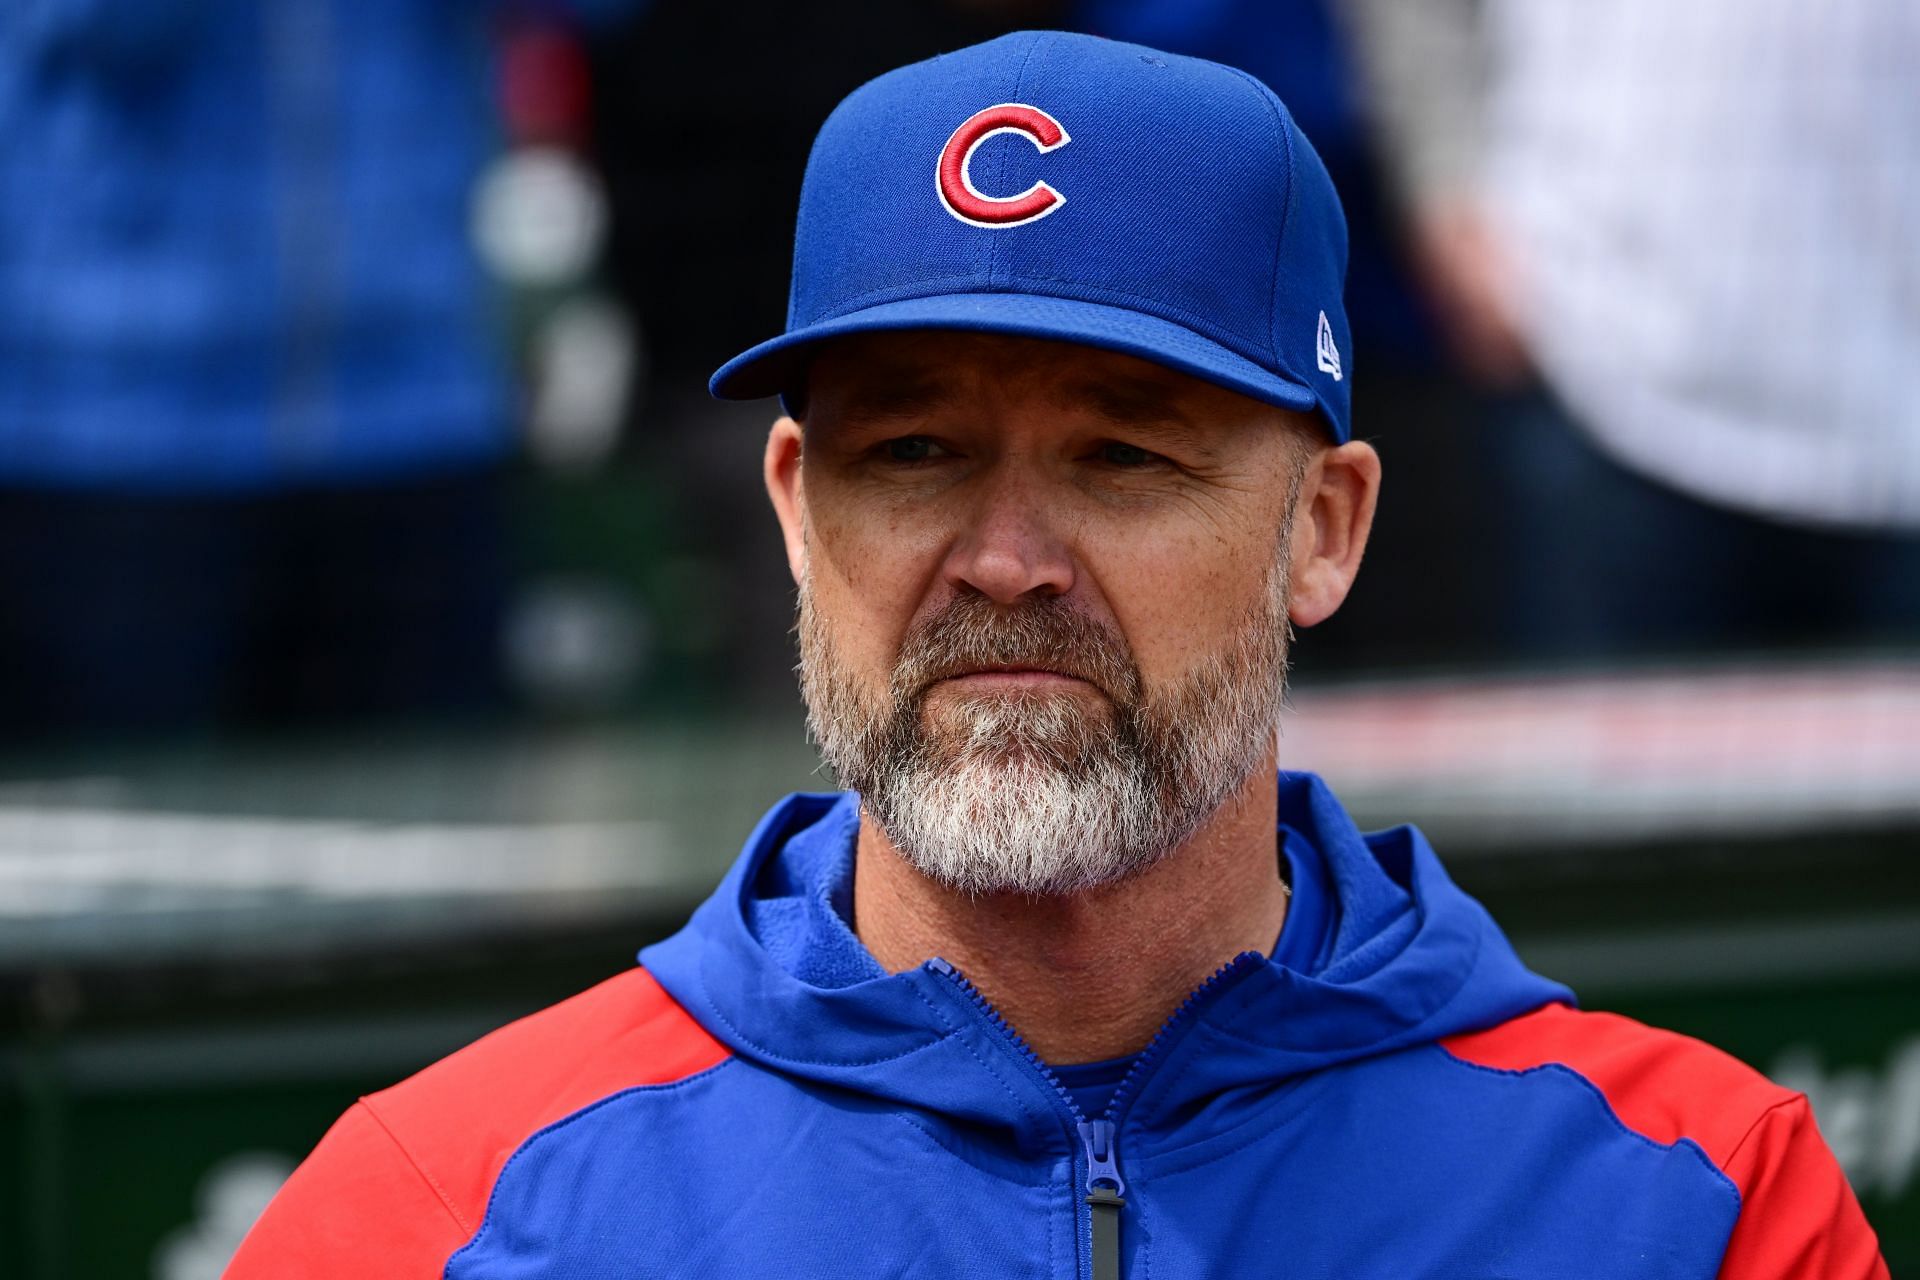 Chicago Cubs manager David Ross was ejected after Patrick Wisdom was hit by a pitch in a move that he viewed as retaliatory.